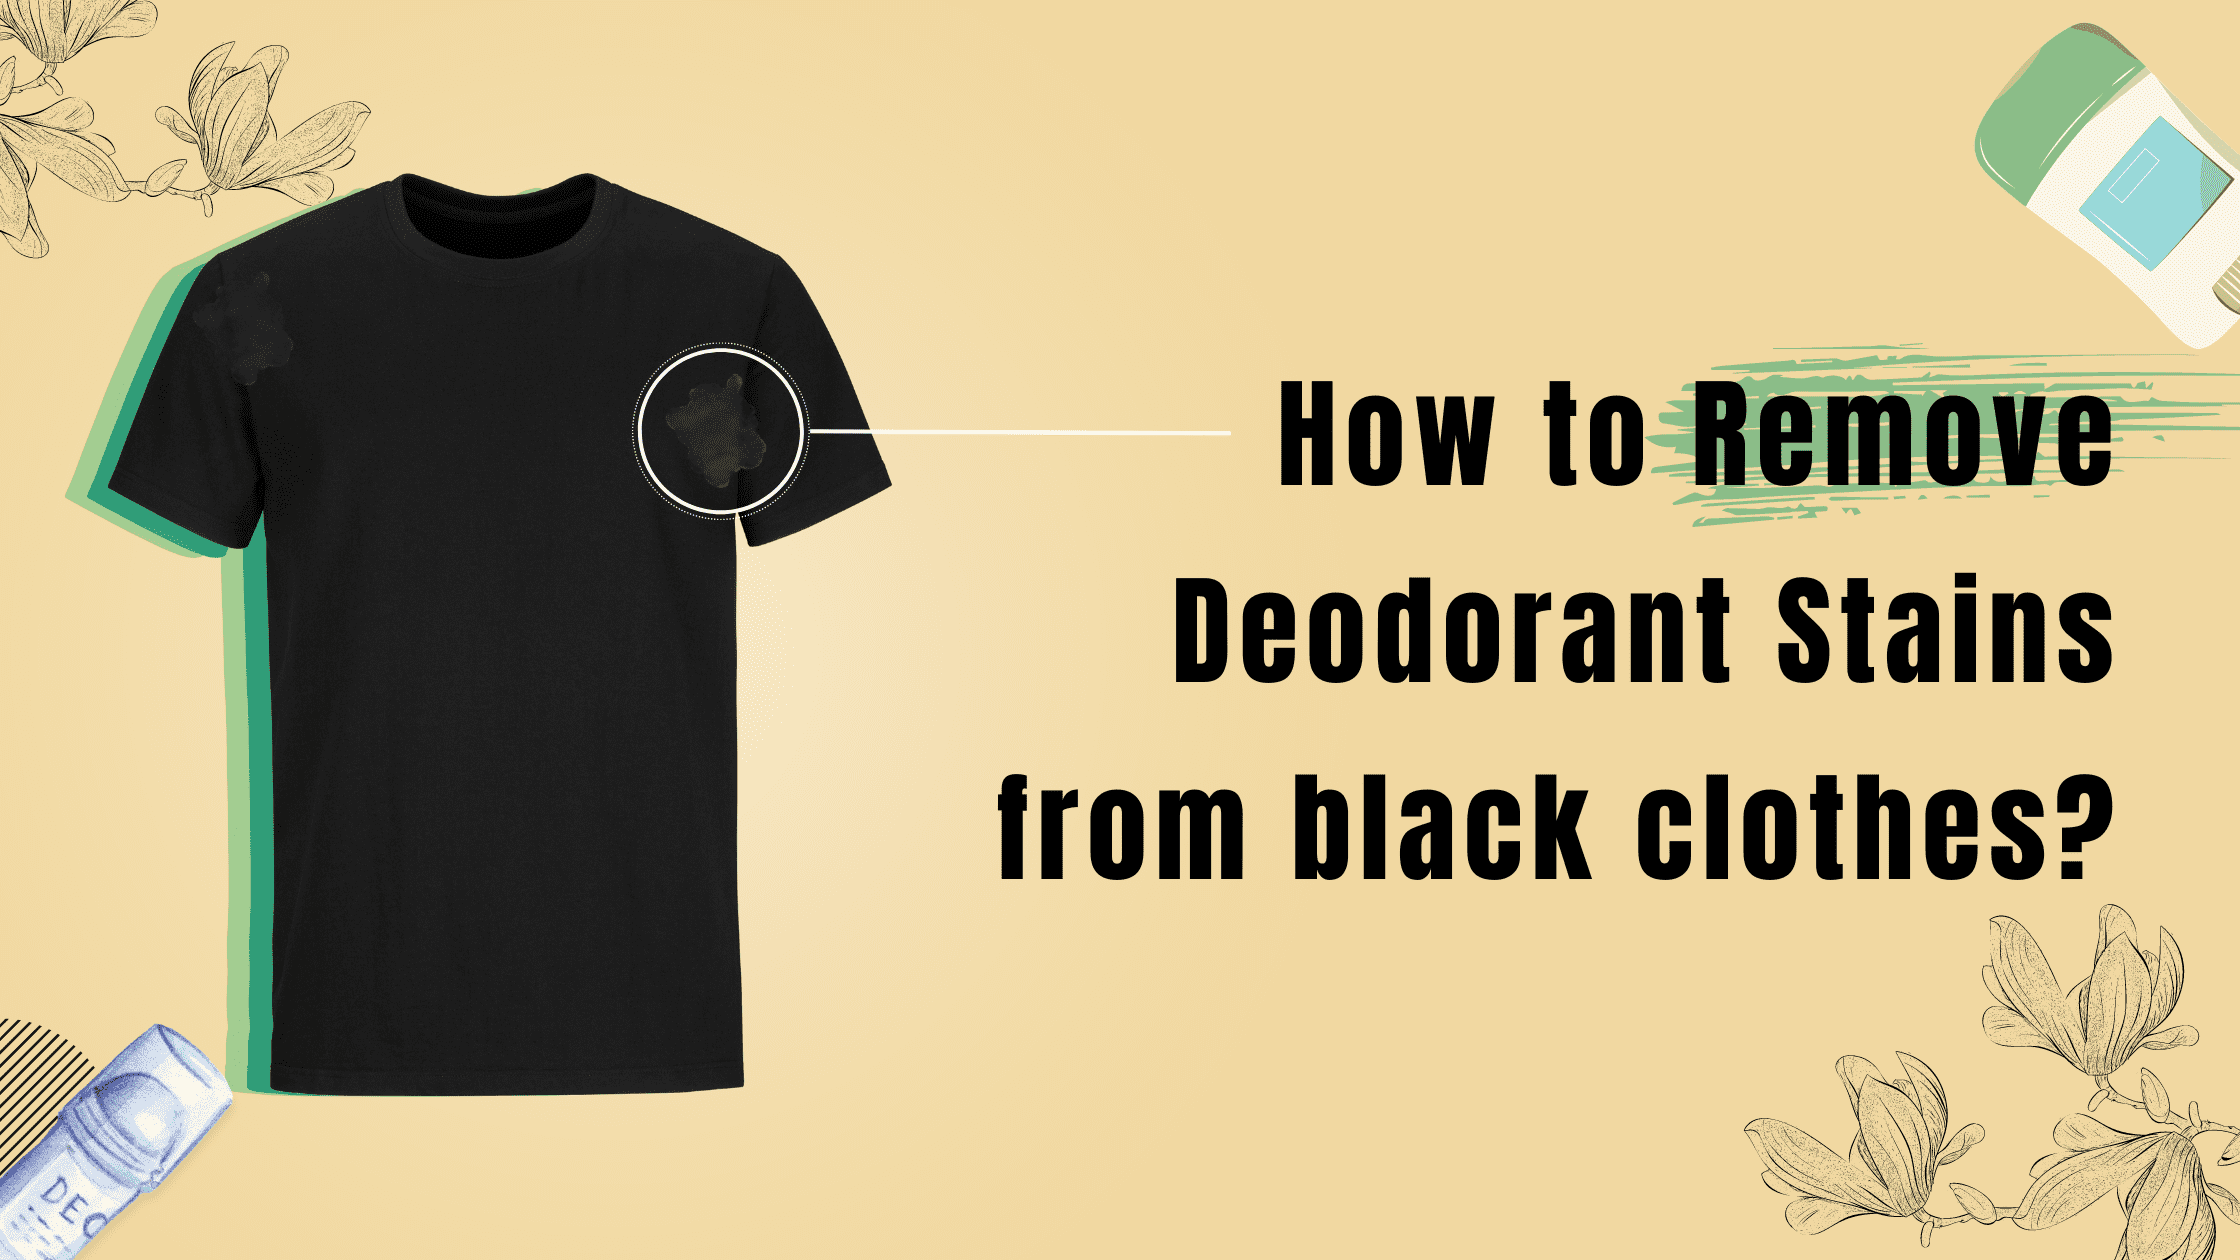 How to Remove Deodorant Stains From Black Clothes